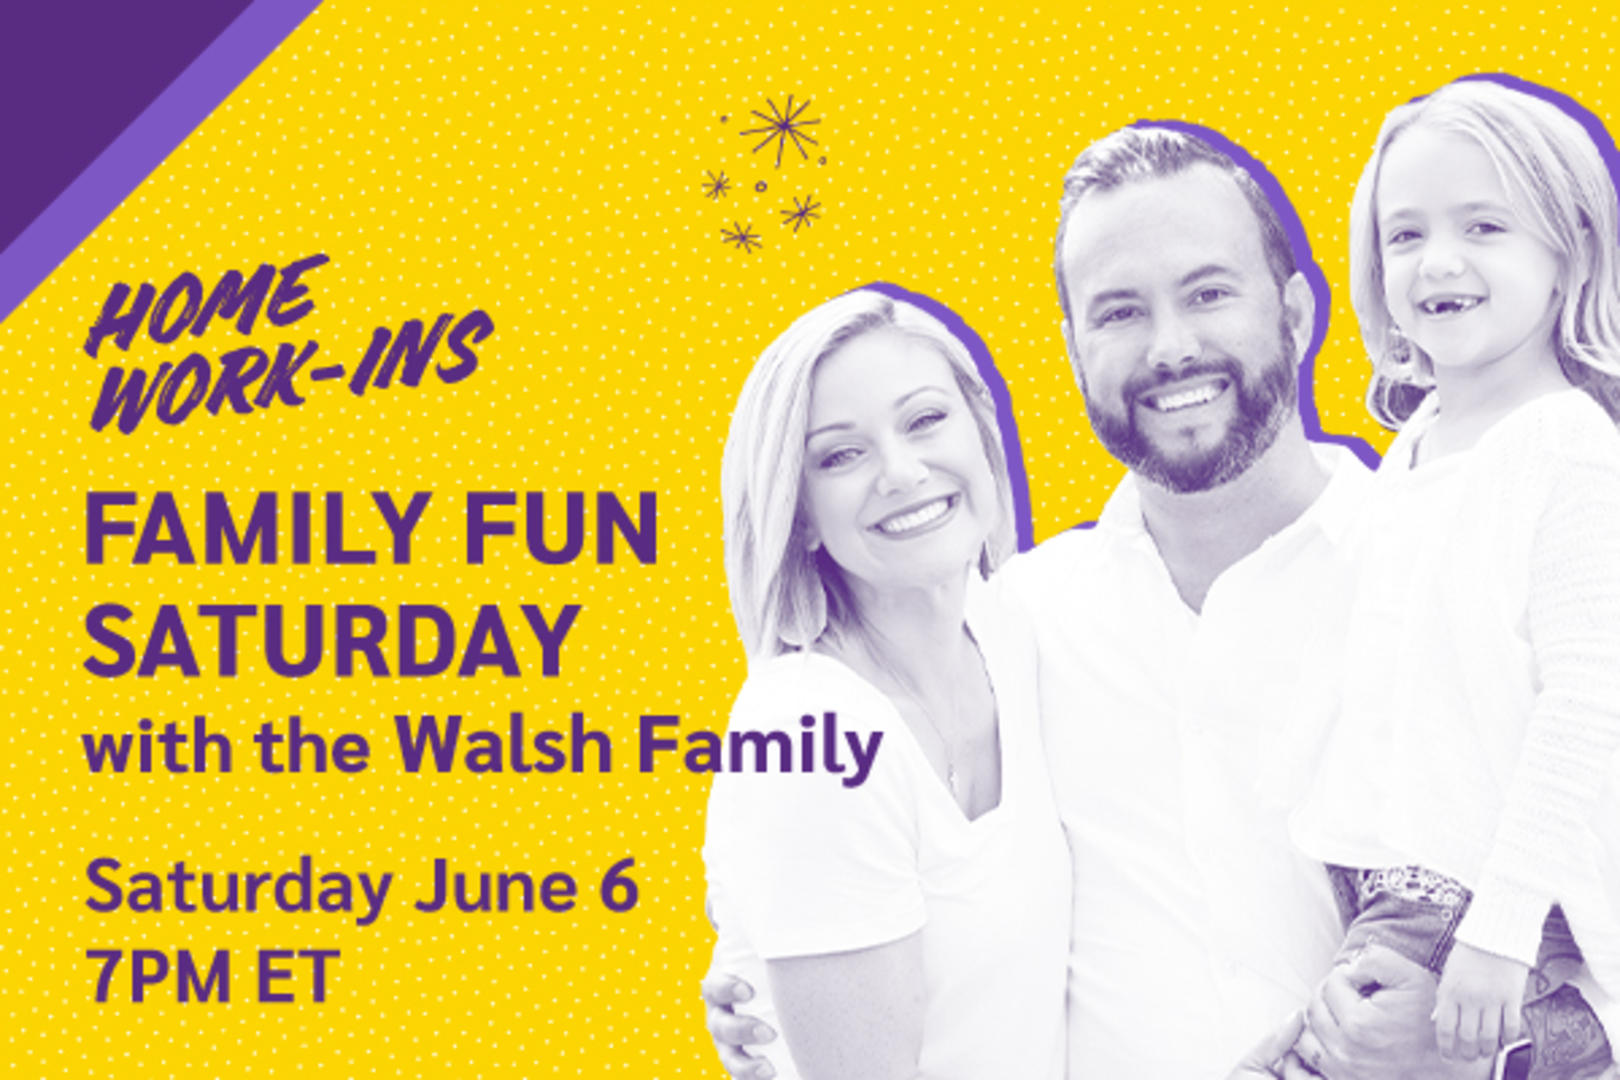 Image showing the copy Saturday 7PM ET - Family Fun Saturday with Walsh Family